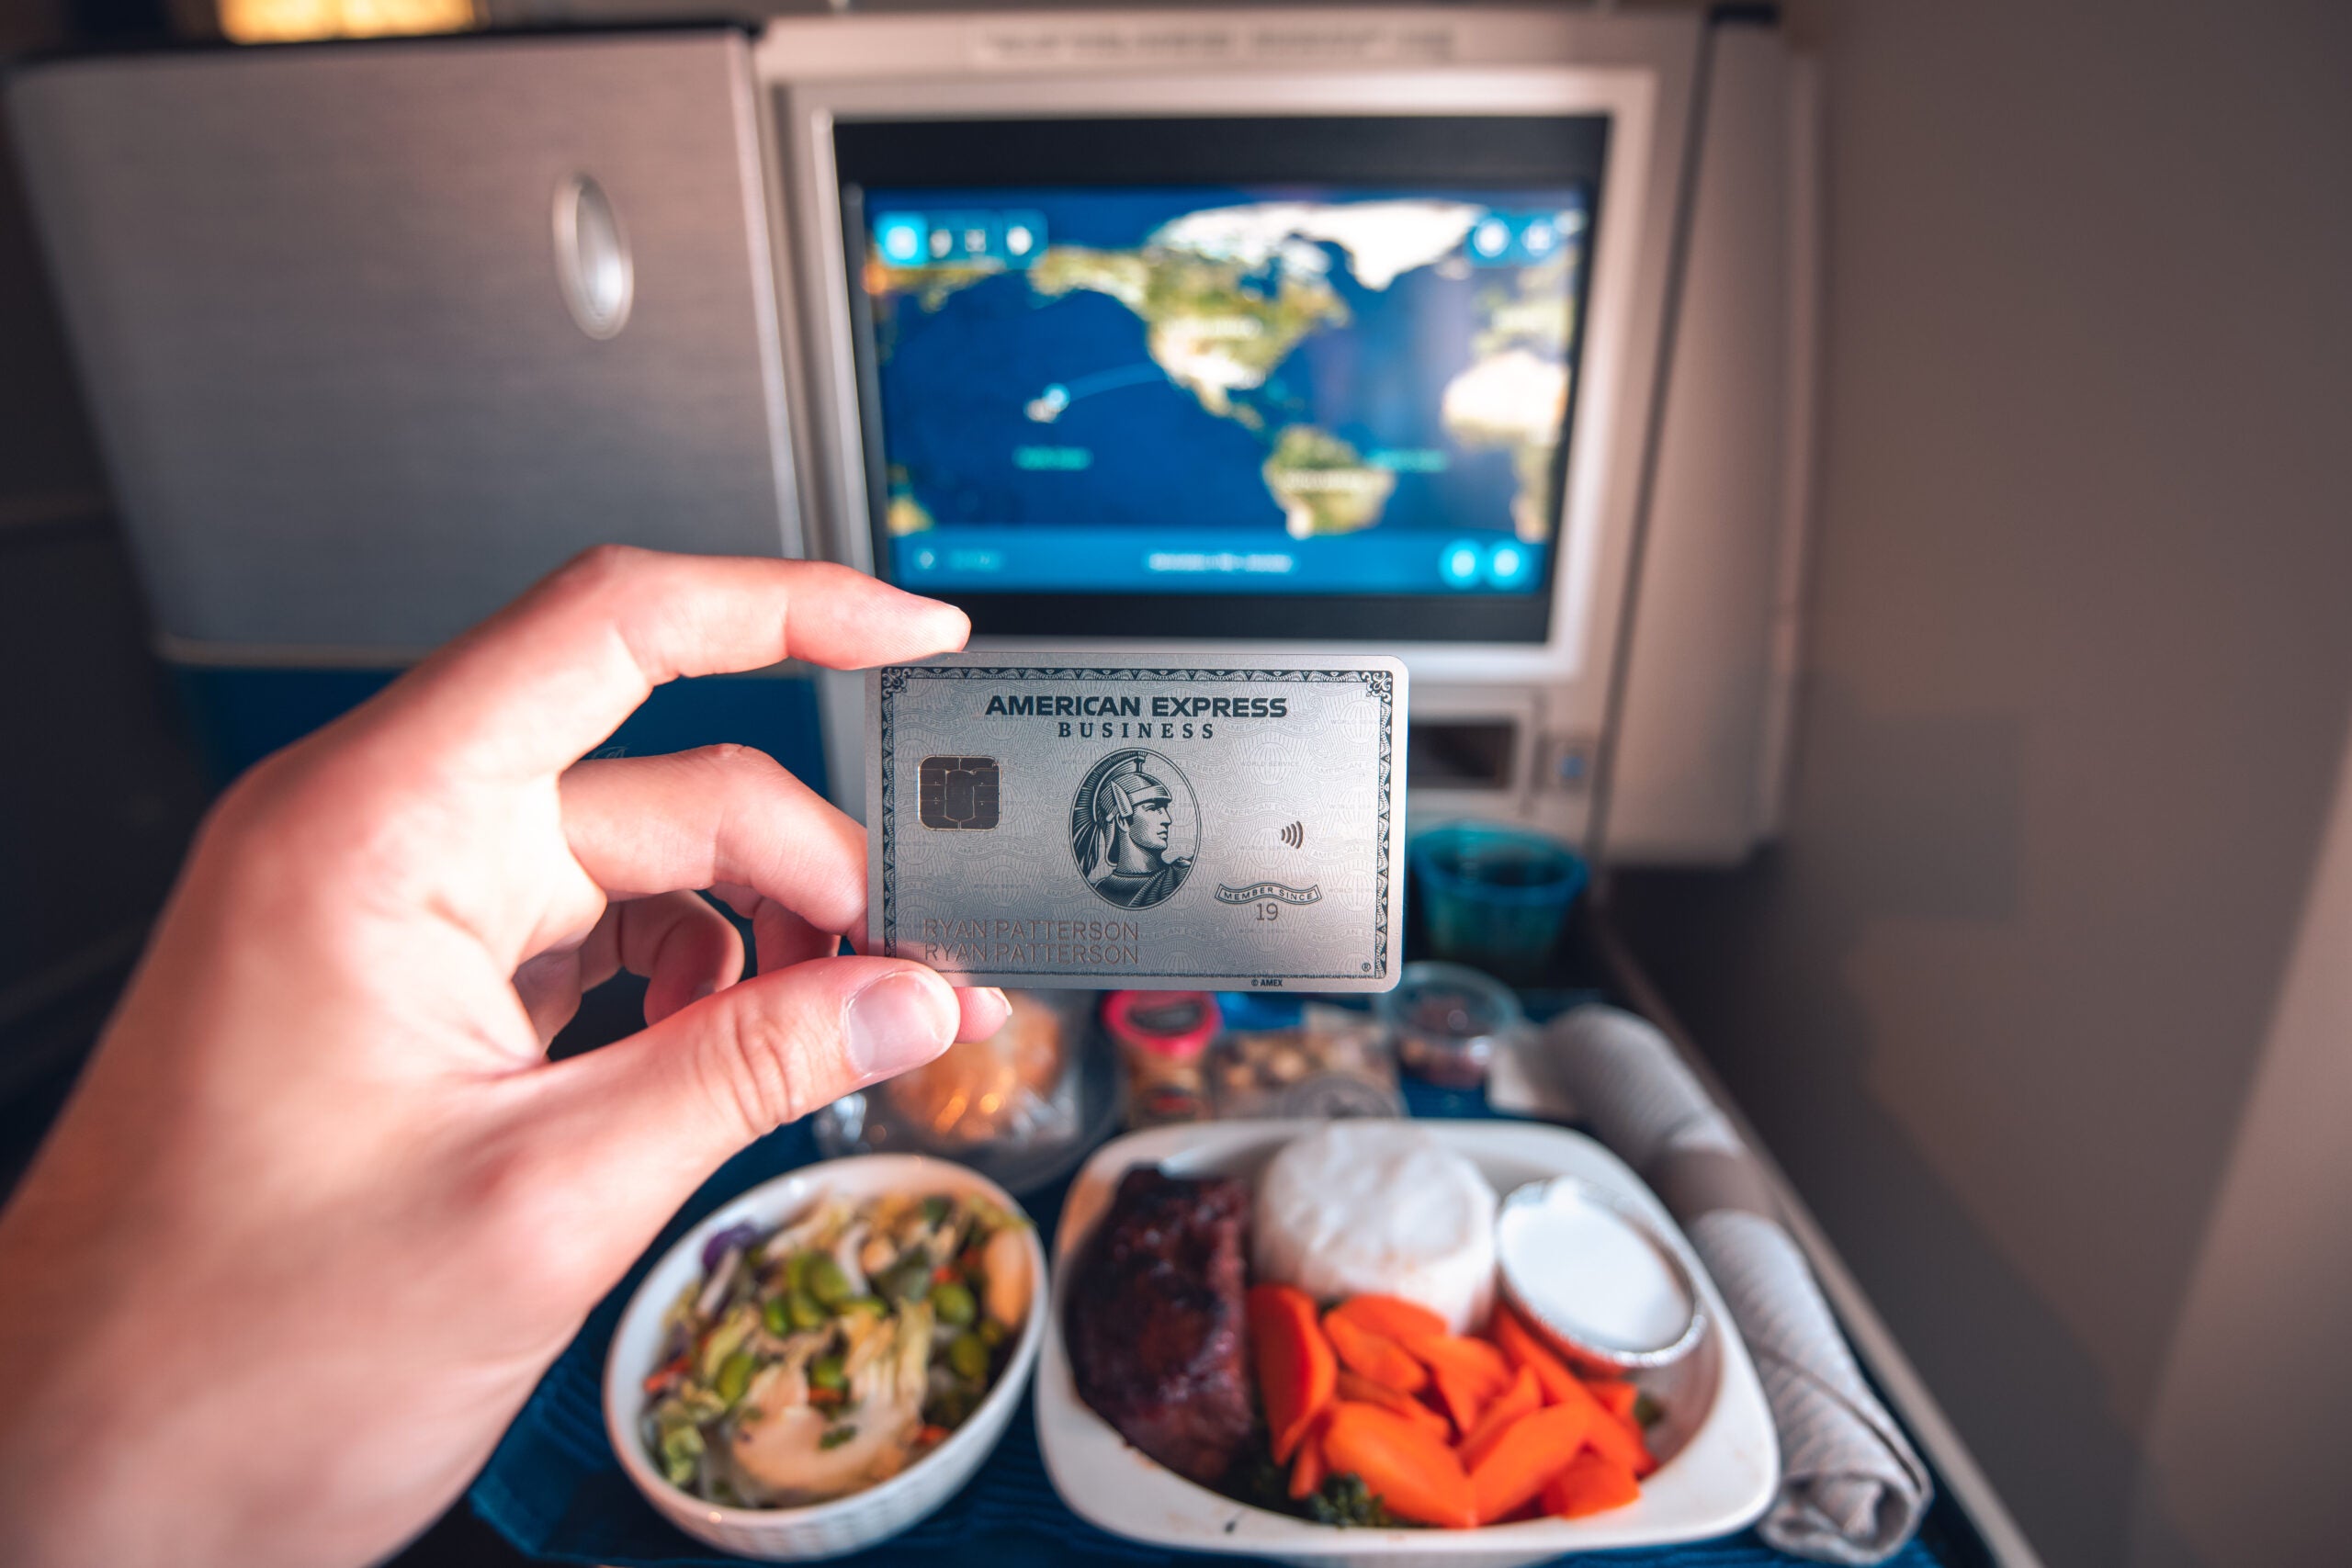 American Express Business Platinum onboard with United meal in business class